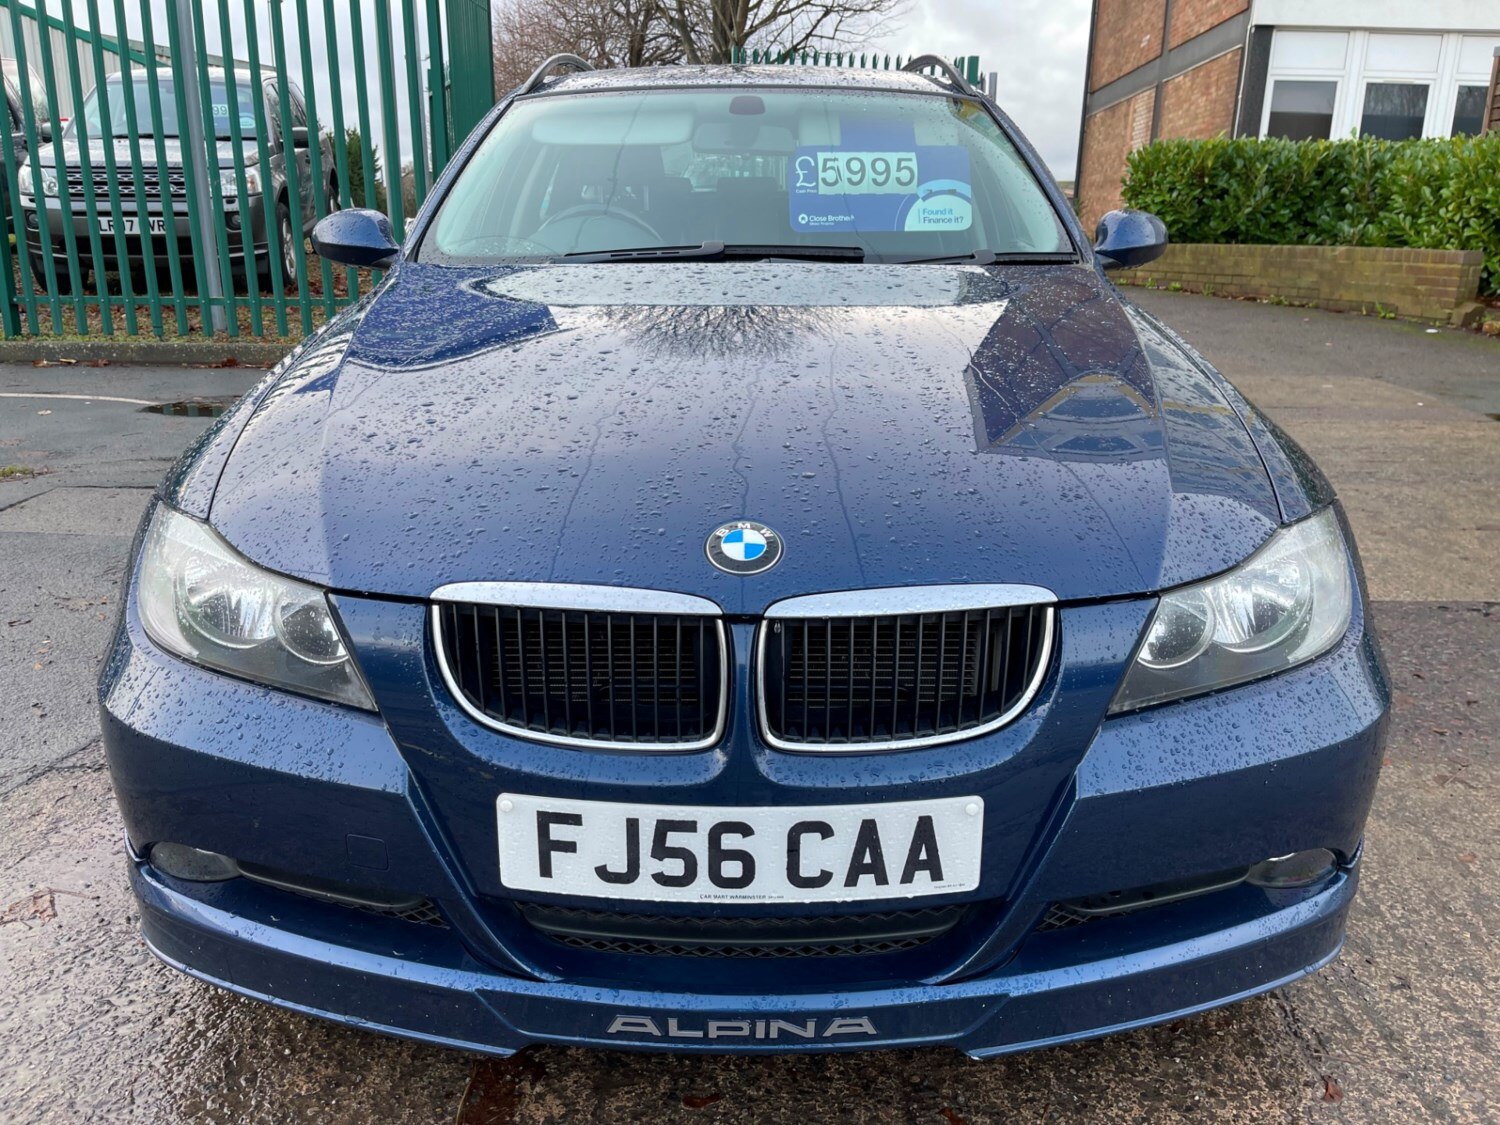 2011 BMW ALPINA (E91) D3 BITURBO TOURING for sale by auction in Wanborough,  Surrey, United Kingdom